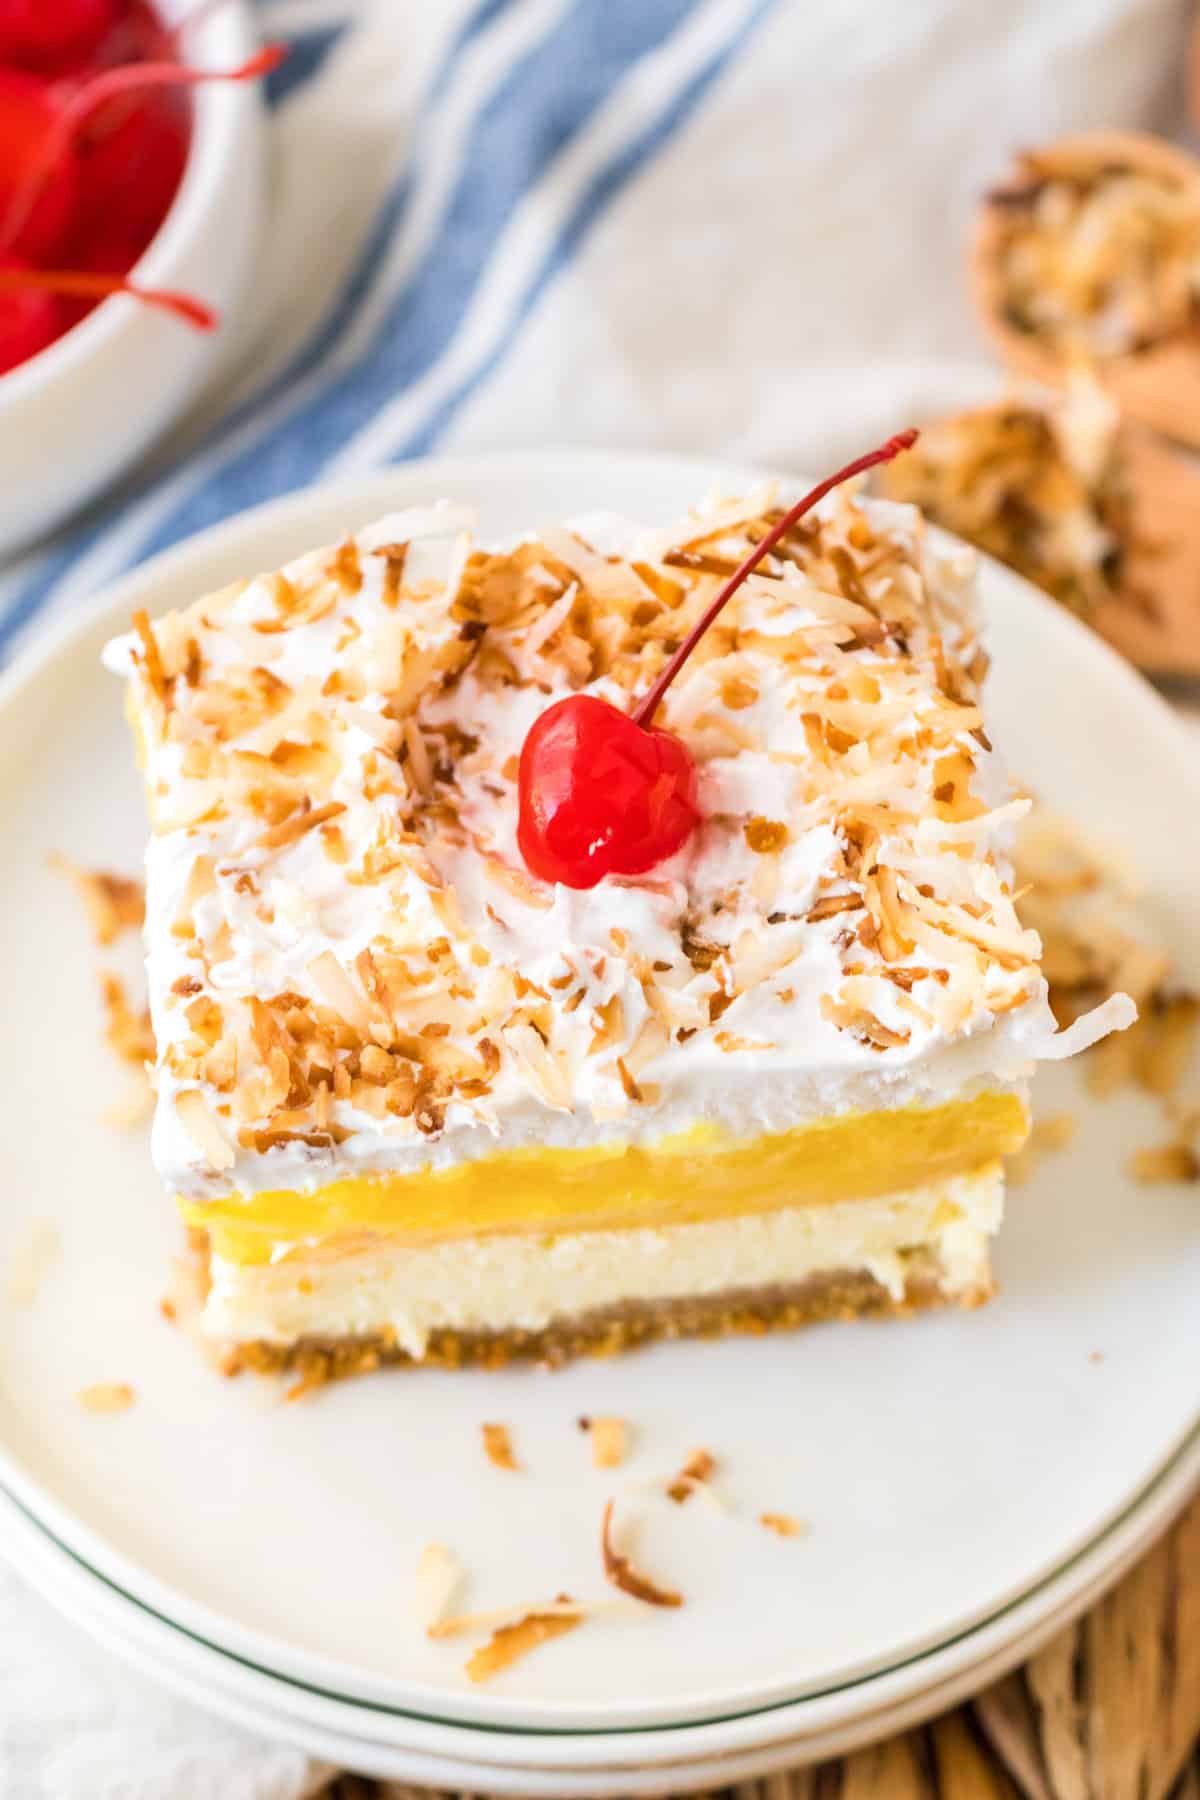 Pineapple Coconut Layered Dessert with layers of creamy pineapple filling, coconut cheesecake, and whipped topping on top of a buttery graham cracker crust.